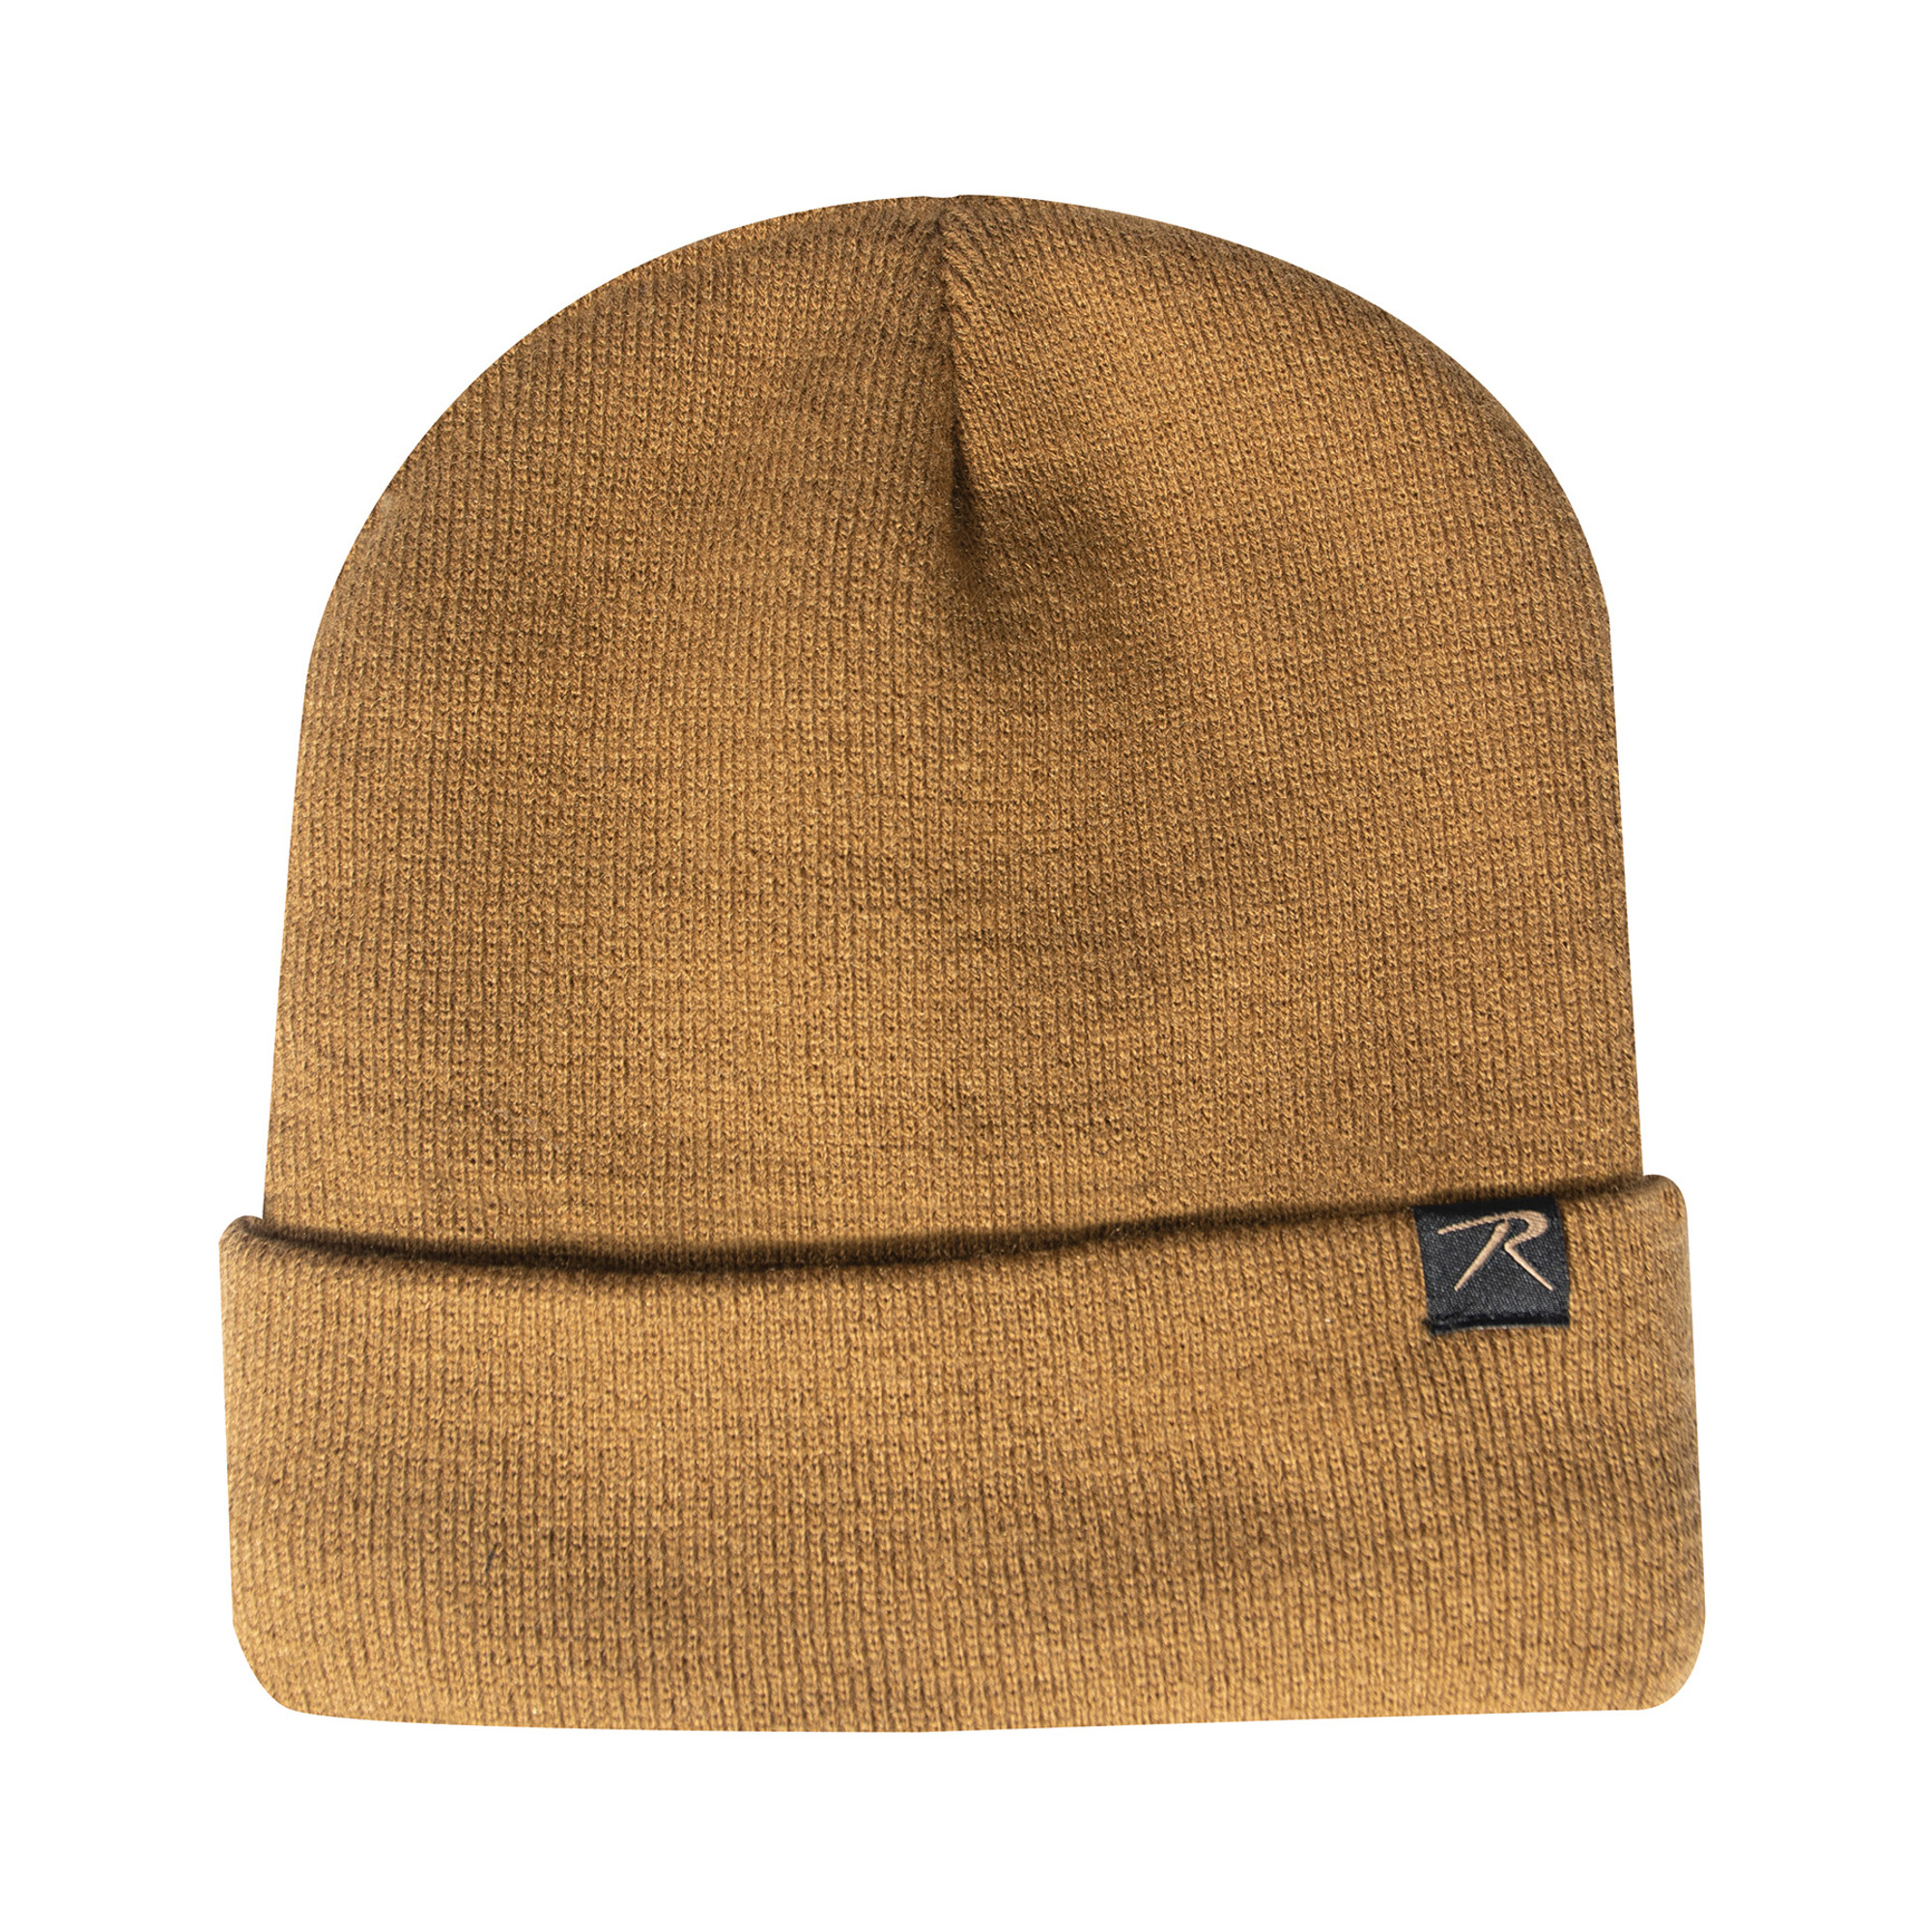 Rothco Deluxe Fine Knit Fleece-Lined Watch Cap - Coyote Brown